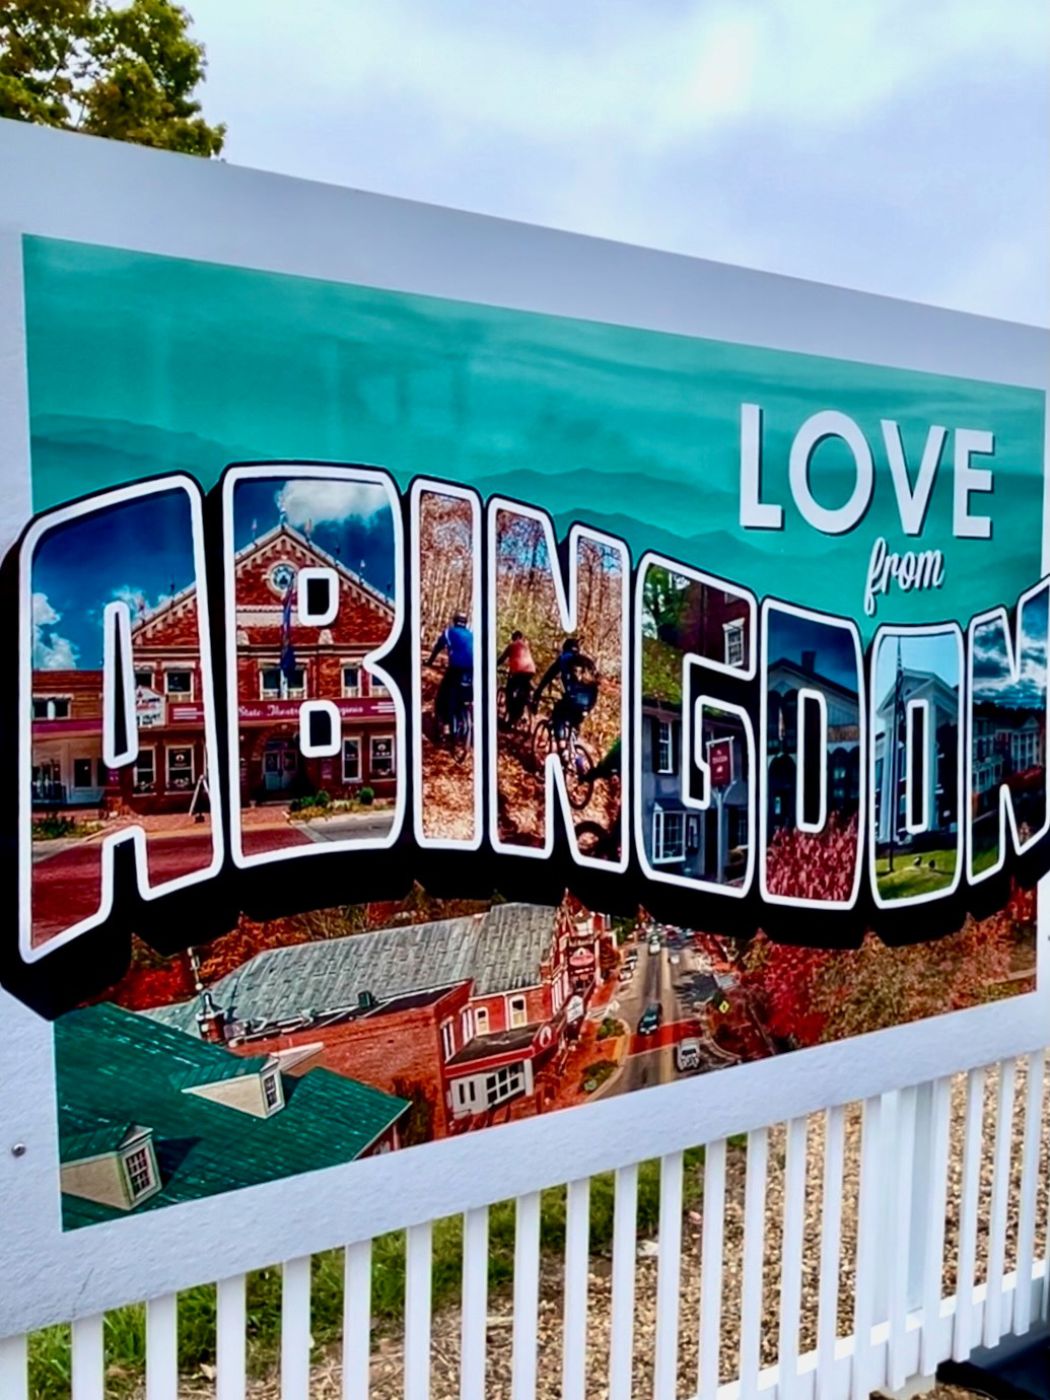 An Abingdon postcard mural is near the visitor's center.